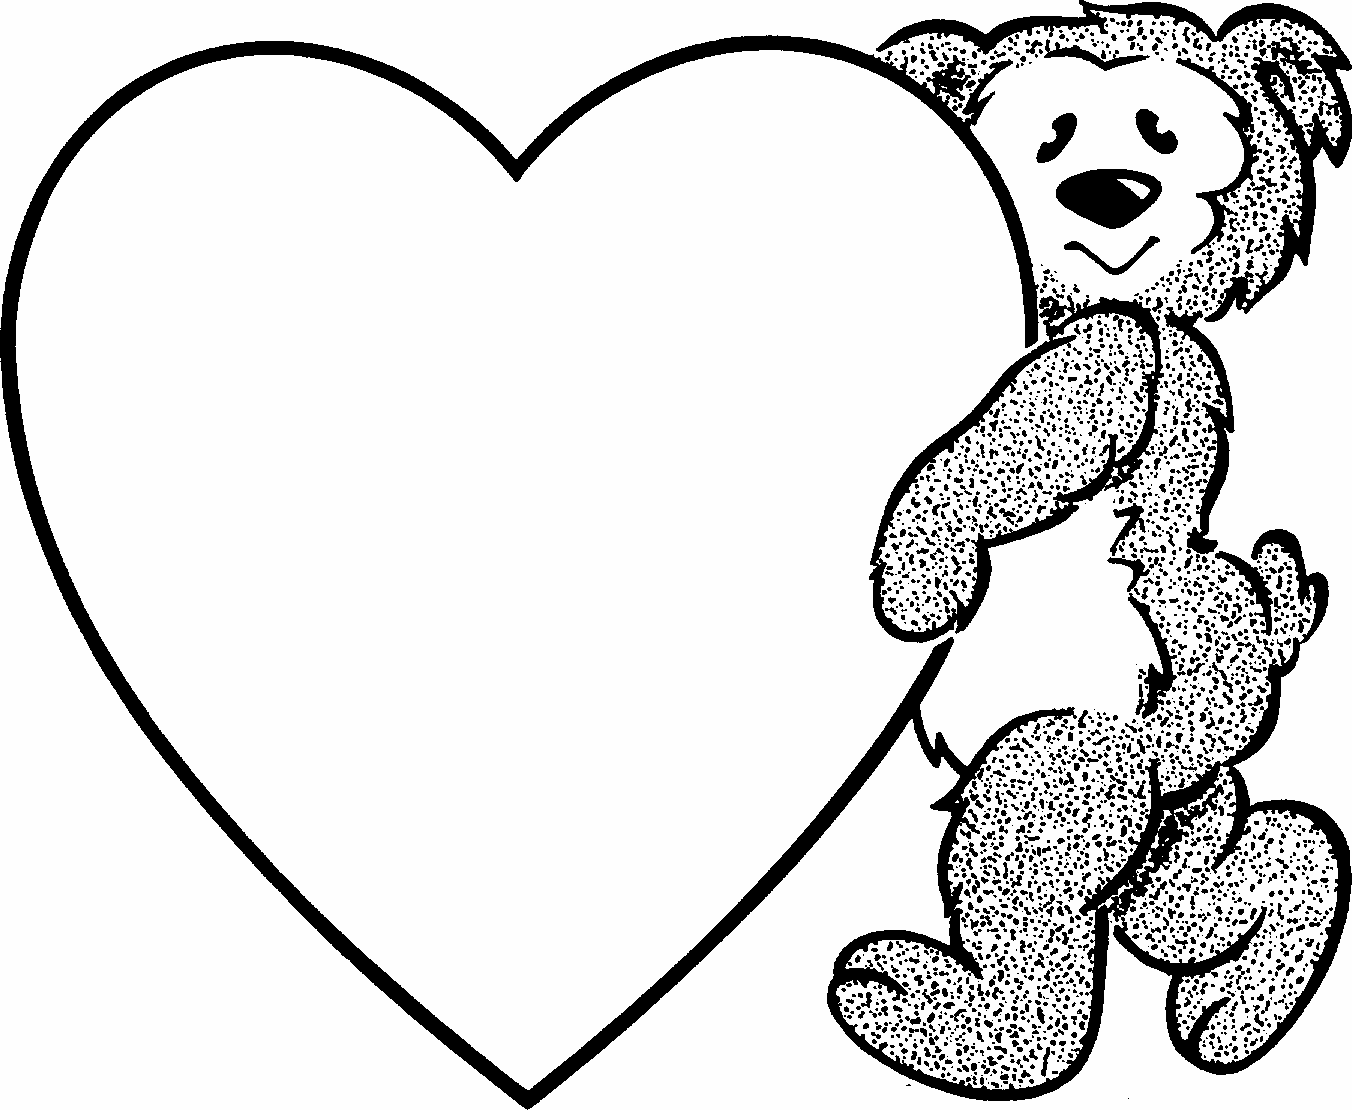 heart coloring pictures free printable heart coloring pages for kids cool2bkids heart coloring pictures 